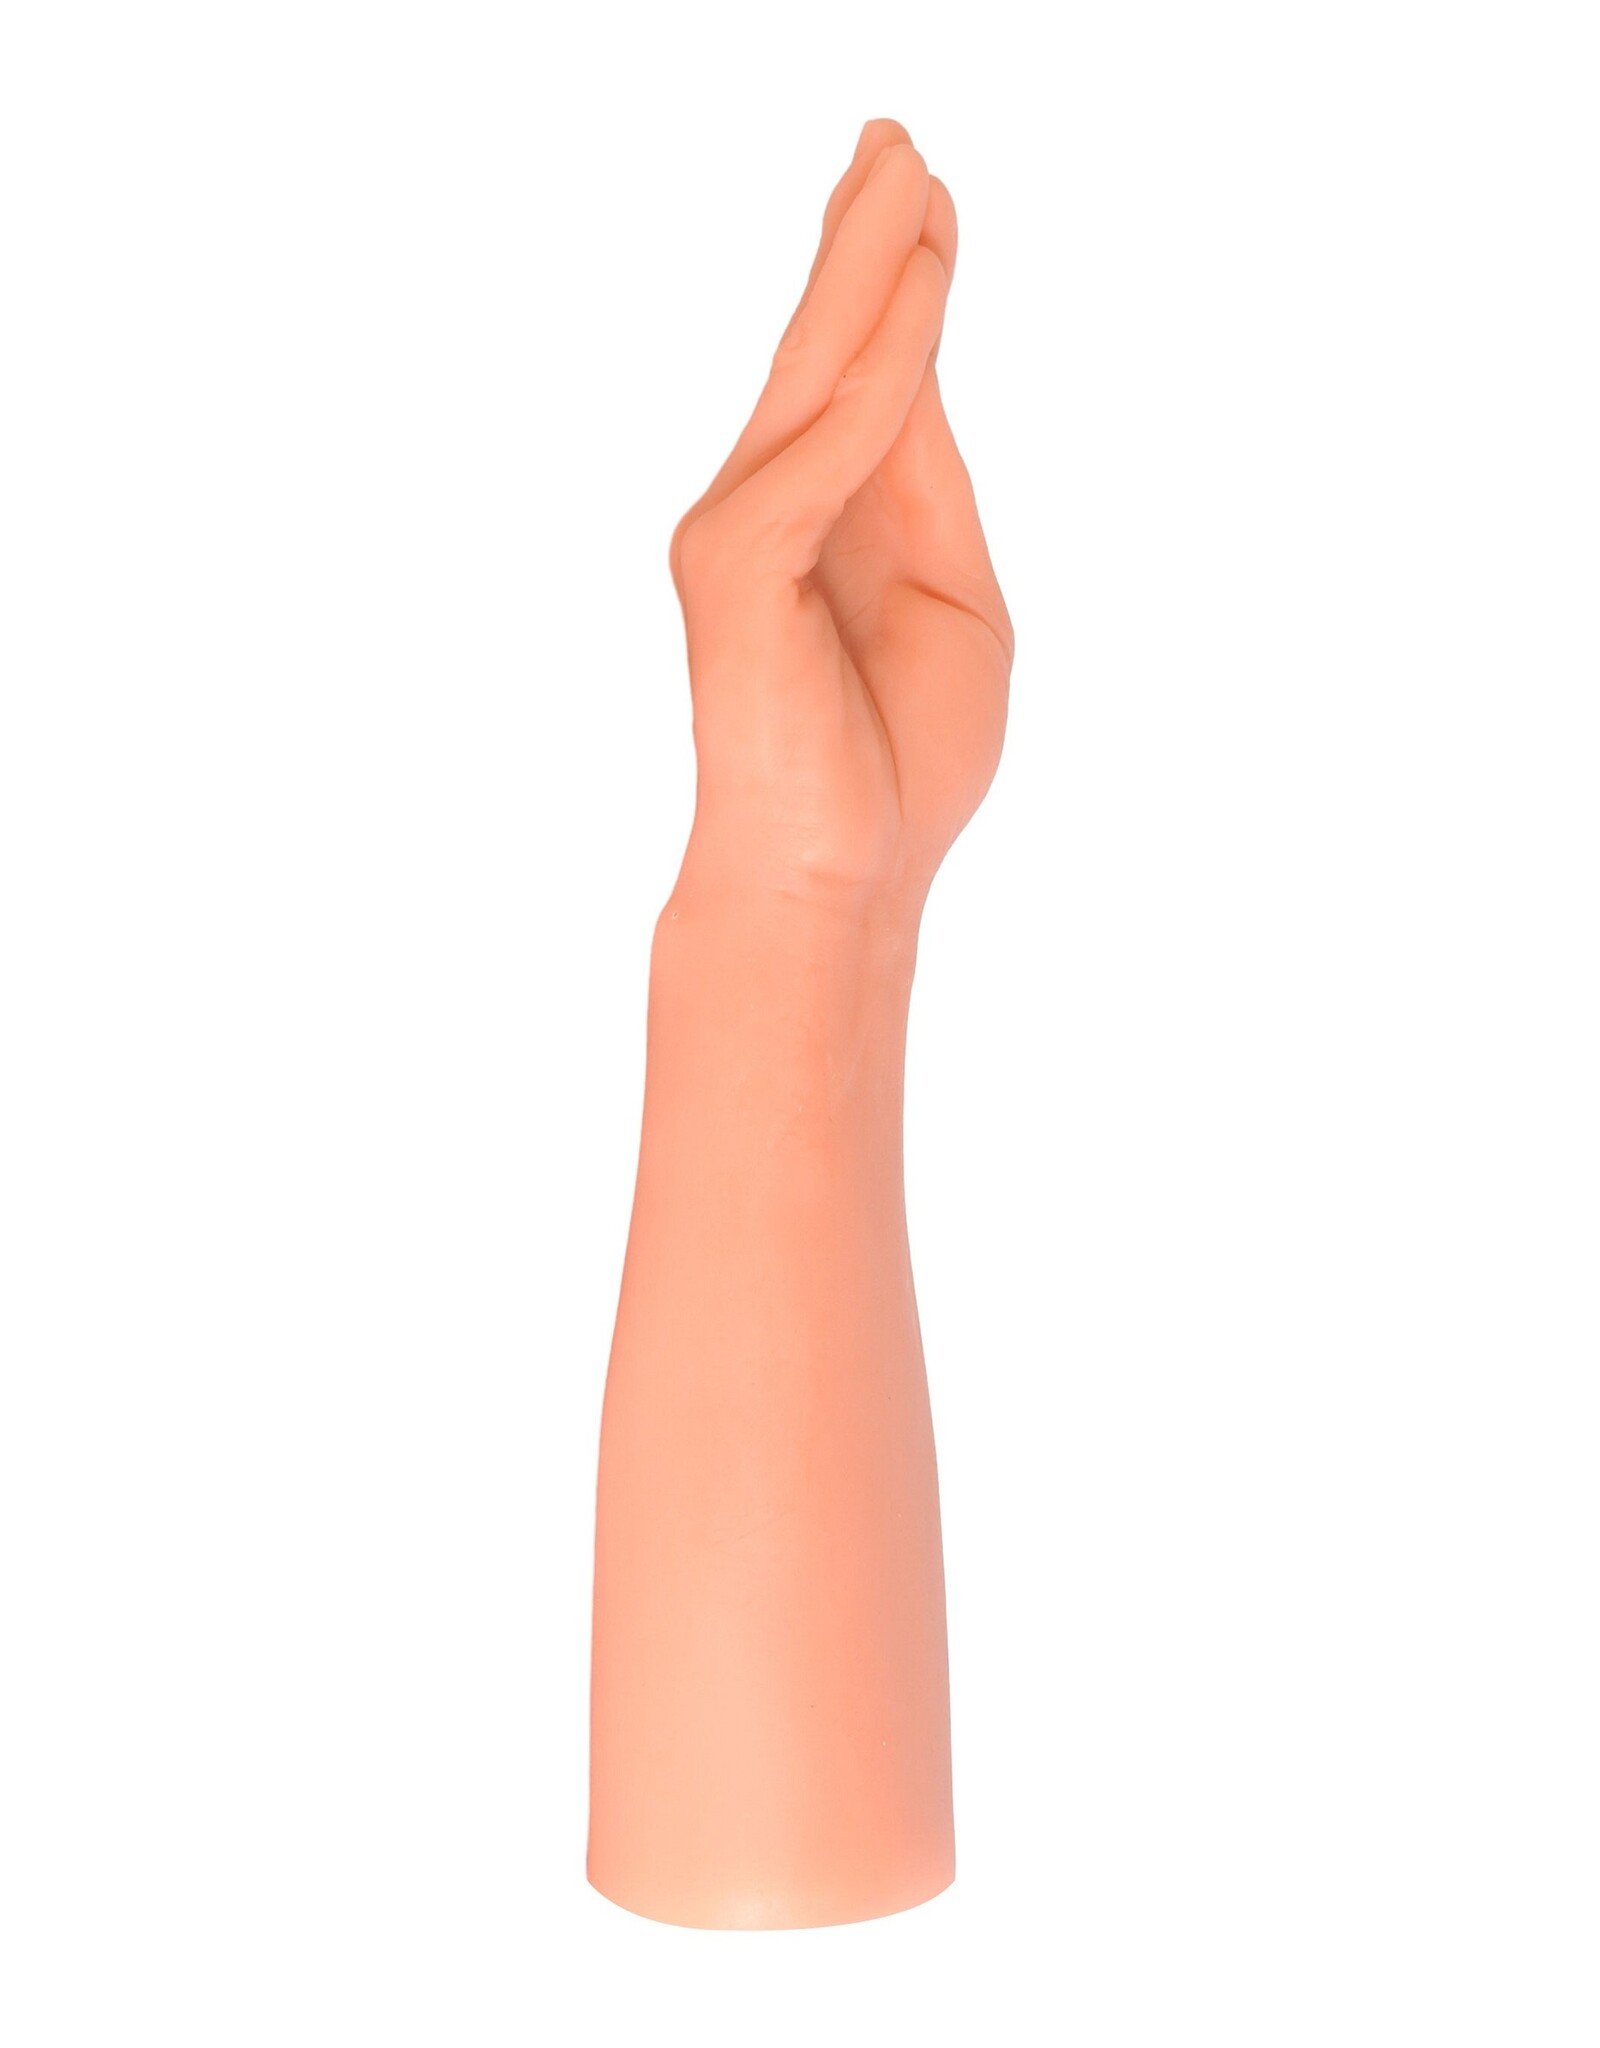 ToyJoy Get Real The Hand Anal Dildo 36 cm